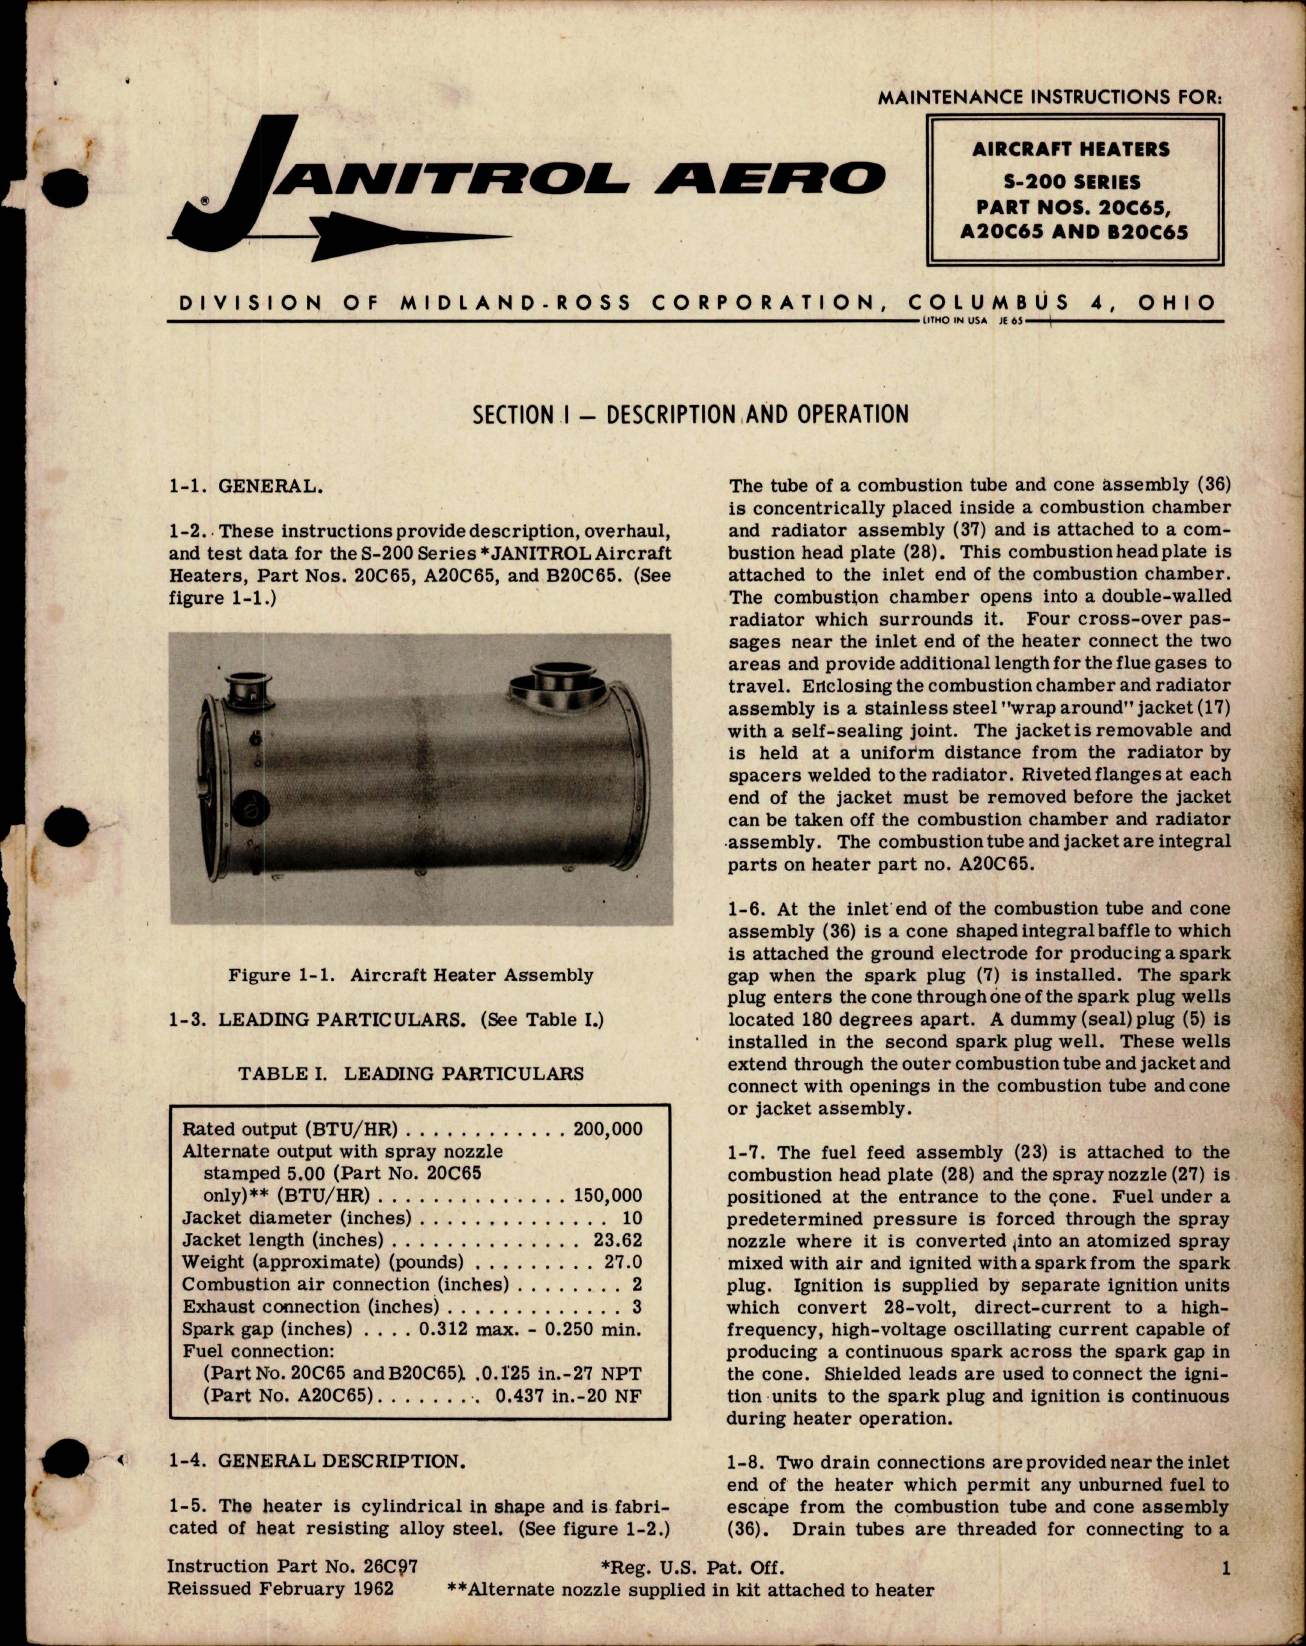 Sample page 1 from AirCorps Library document: Maintenance Instructions for Aircraft Heaters S-200 Series - Parts 20C65, A20C65 and B20C65 